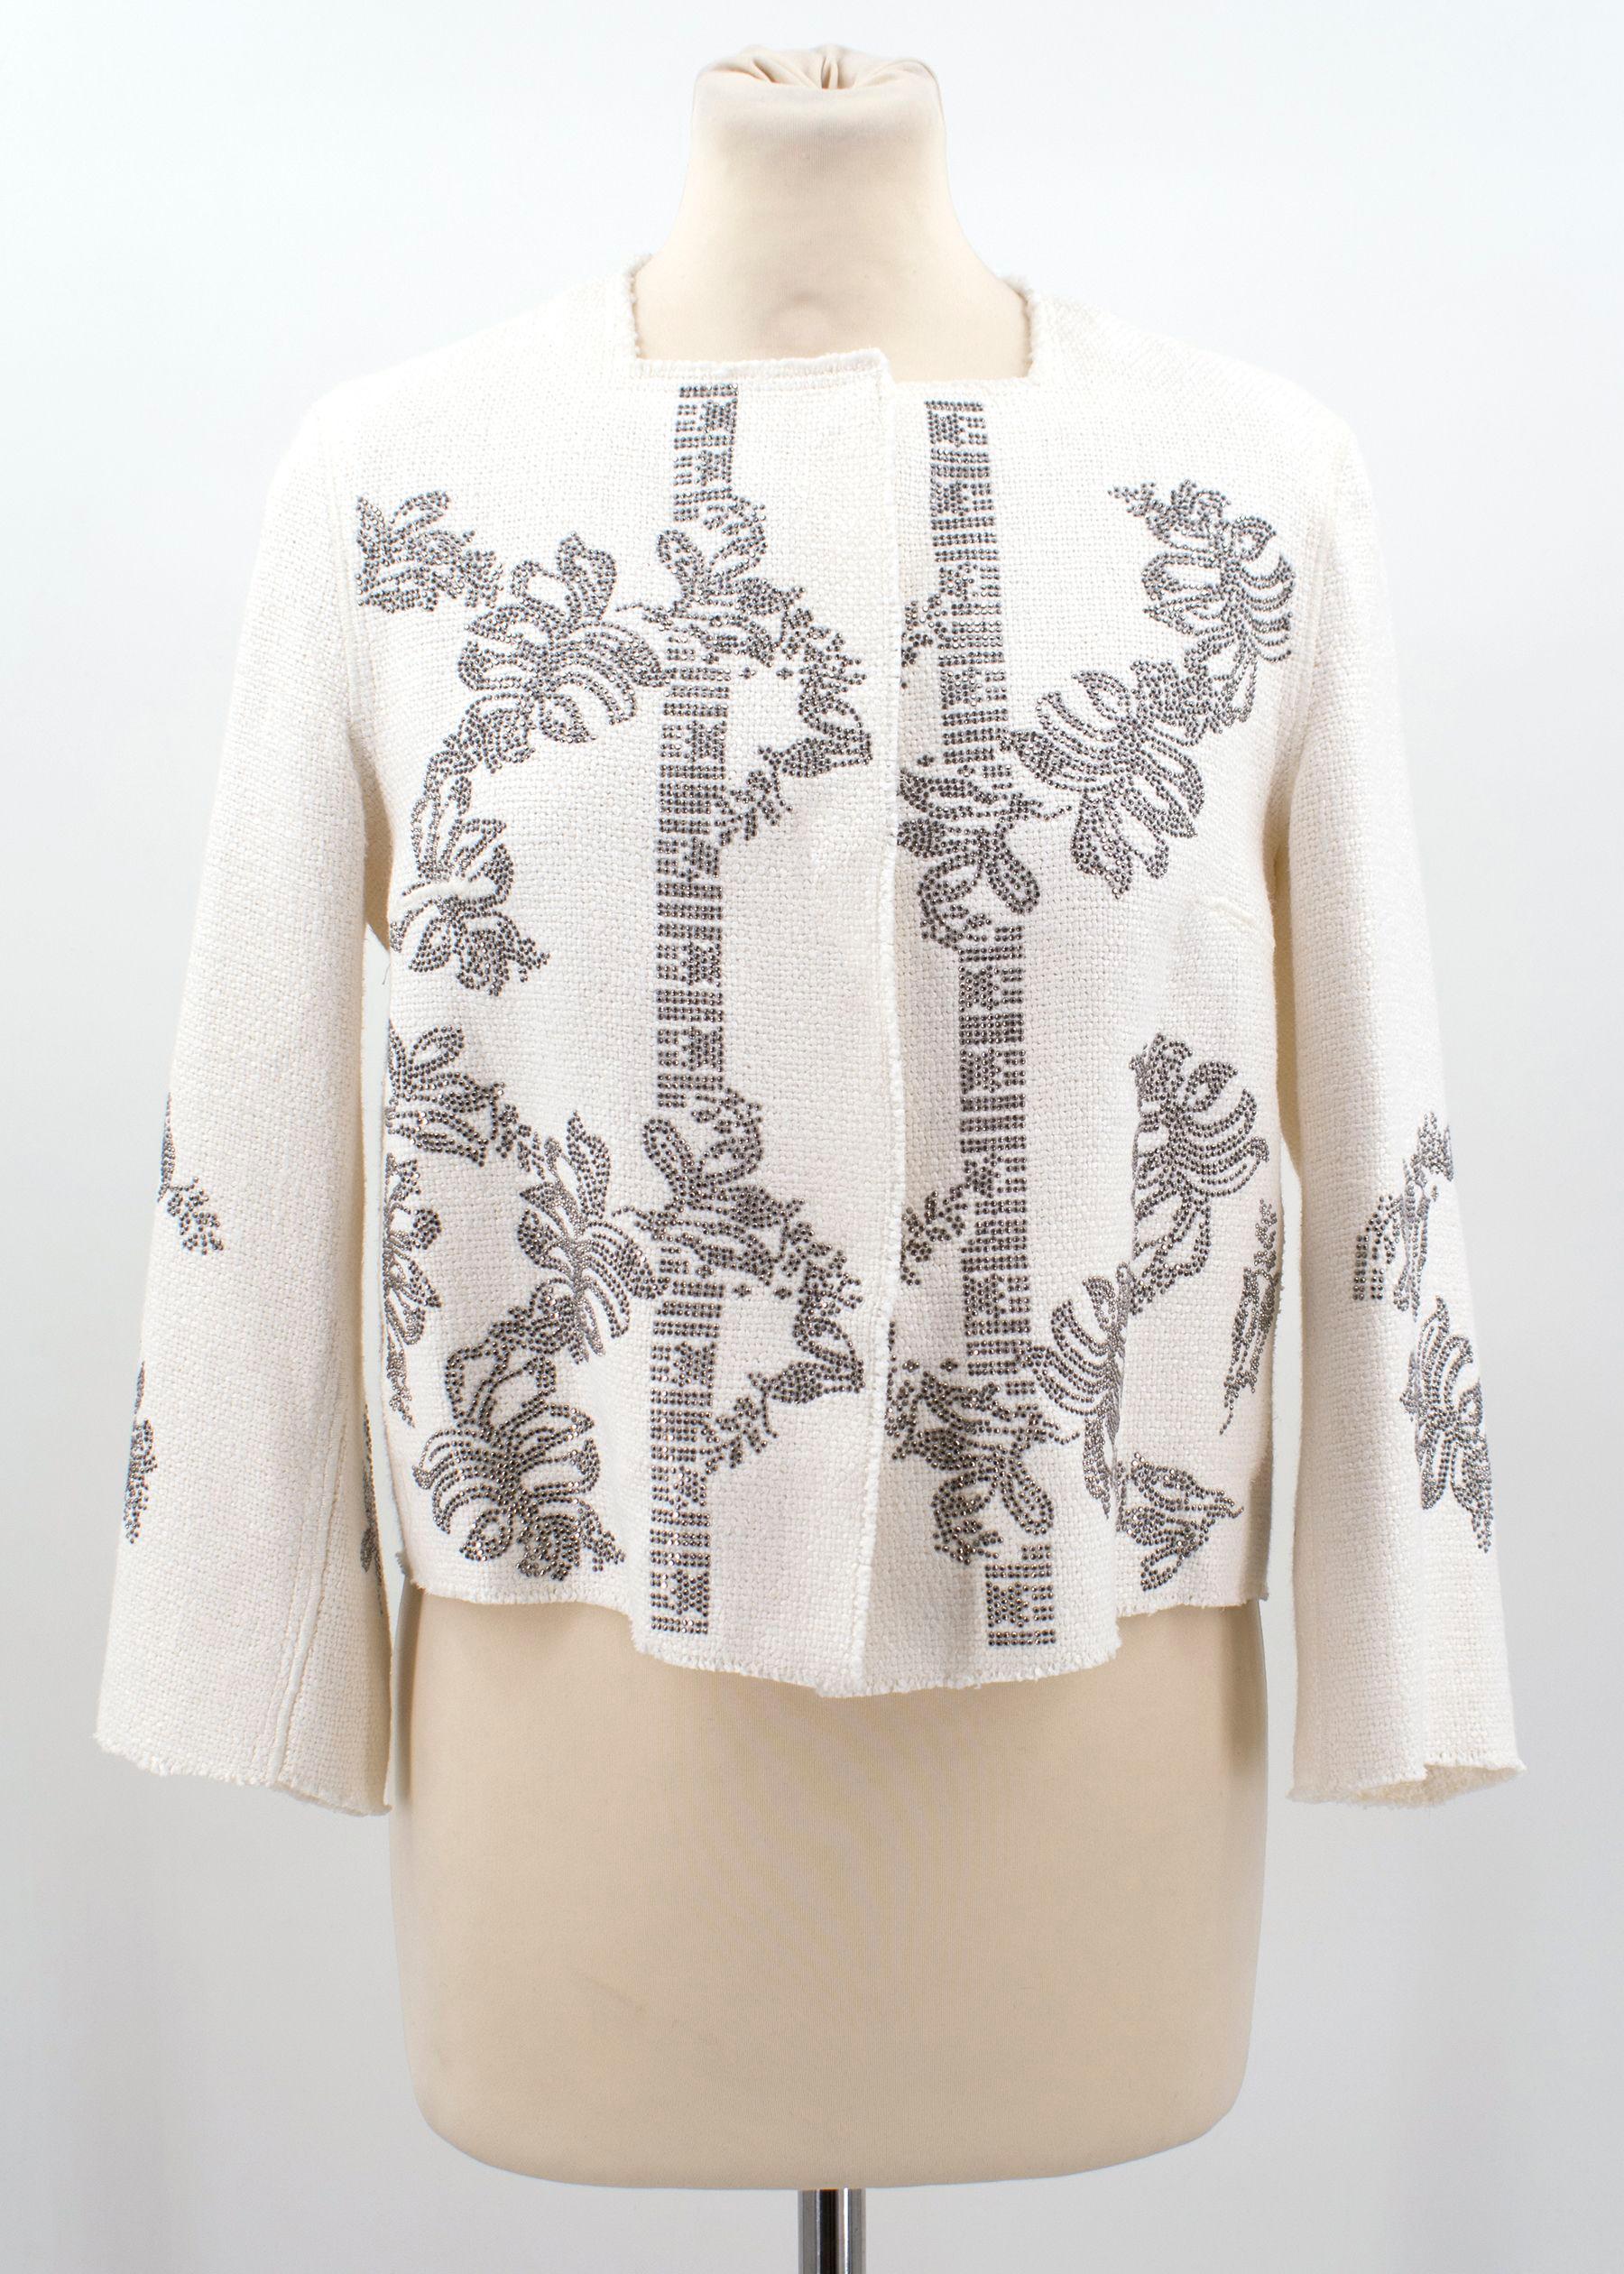 Condition:10/10, never worn with tags.
Cream collarless heavily embellished jacket -  front and back.

Measurements are taken laying flat, seam to seam. 

Shoulders: 38 cm 
Chest: 43 cm 
Length: 47 cm 
Sleeves: 47 cm 